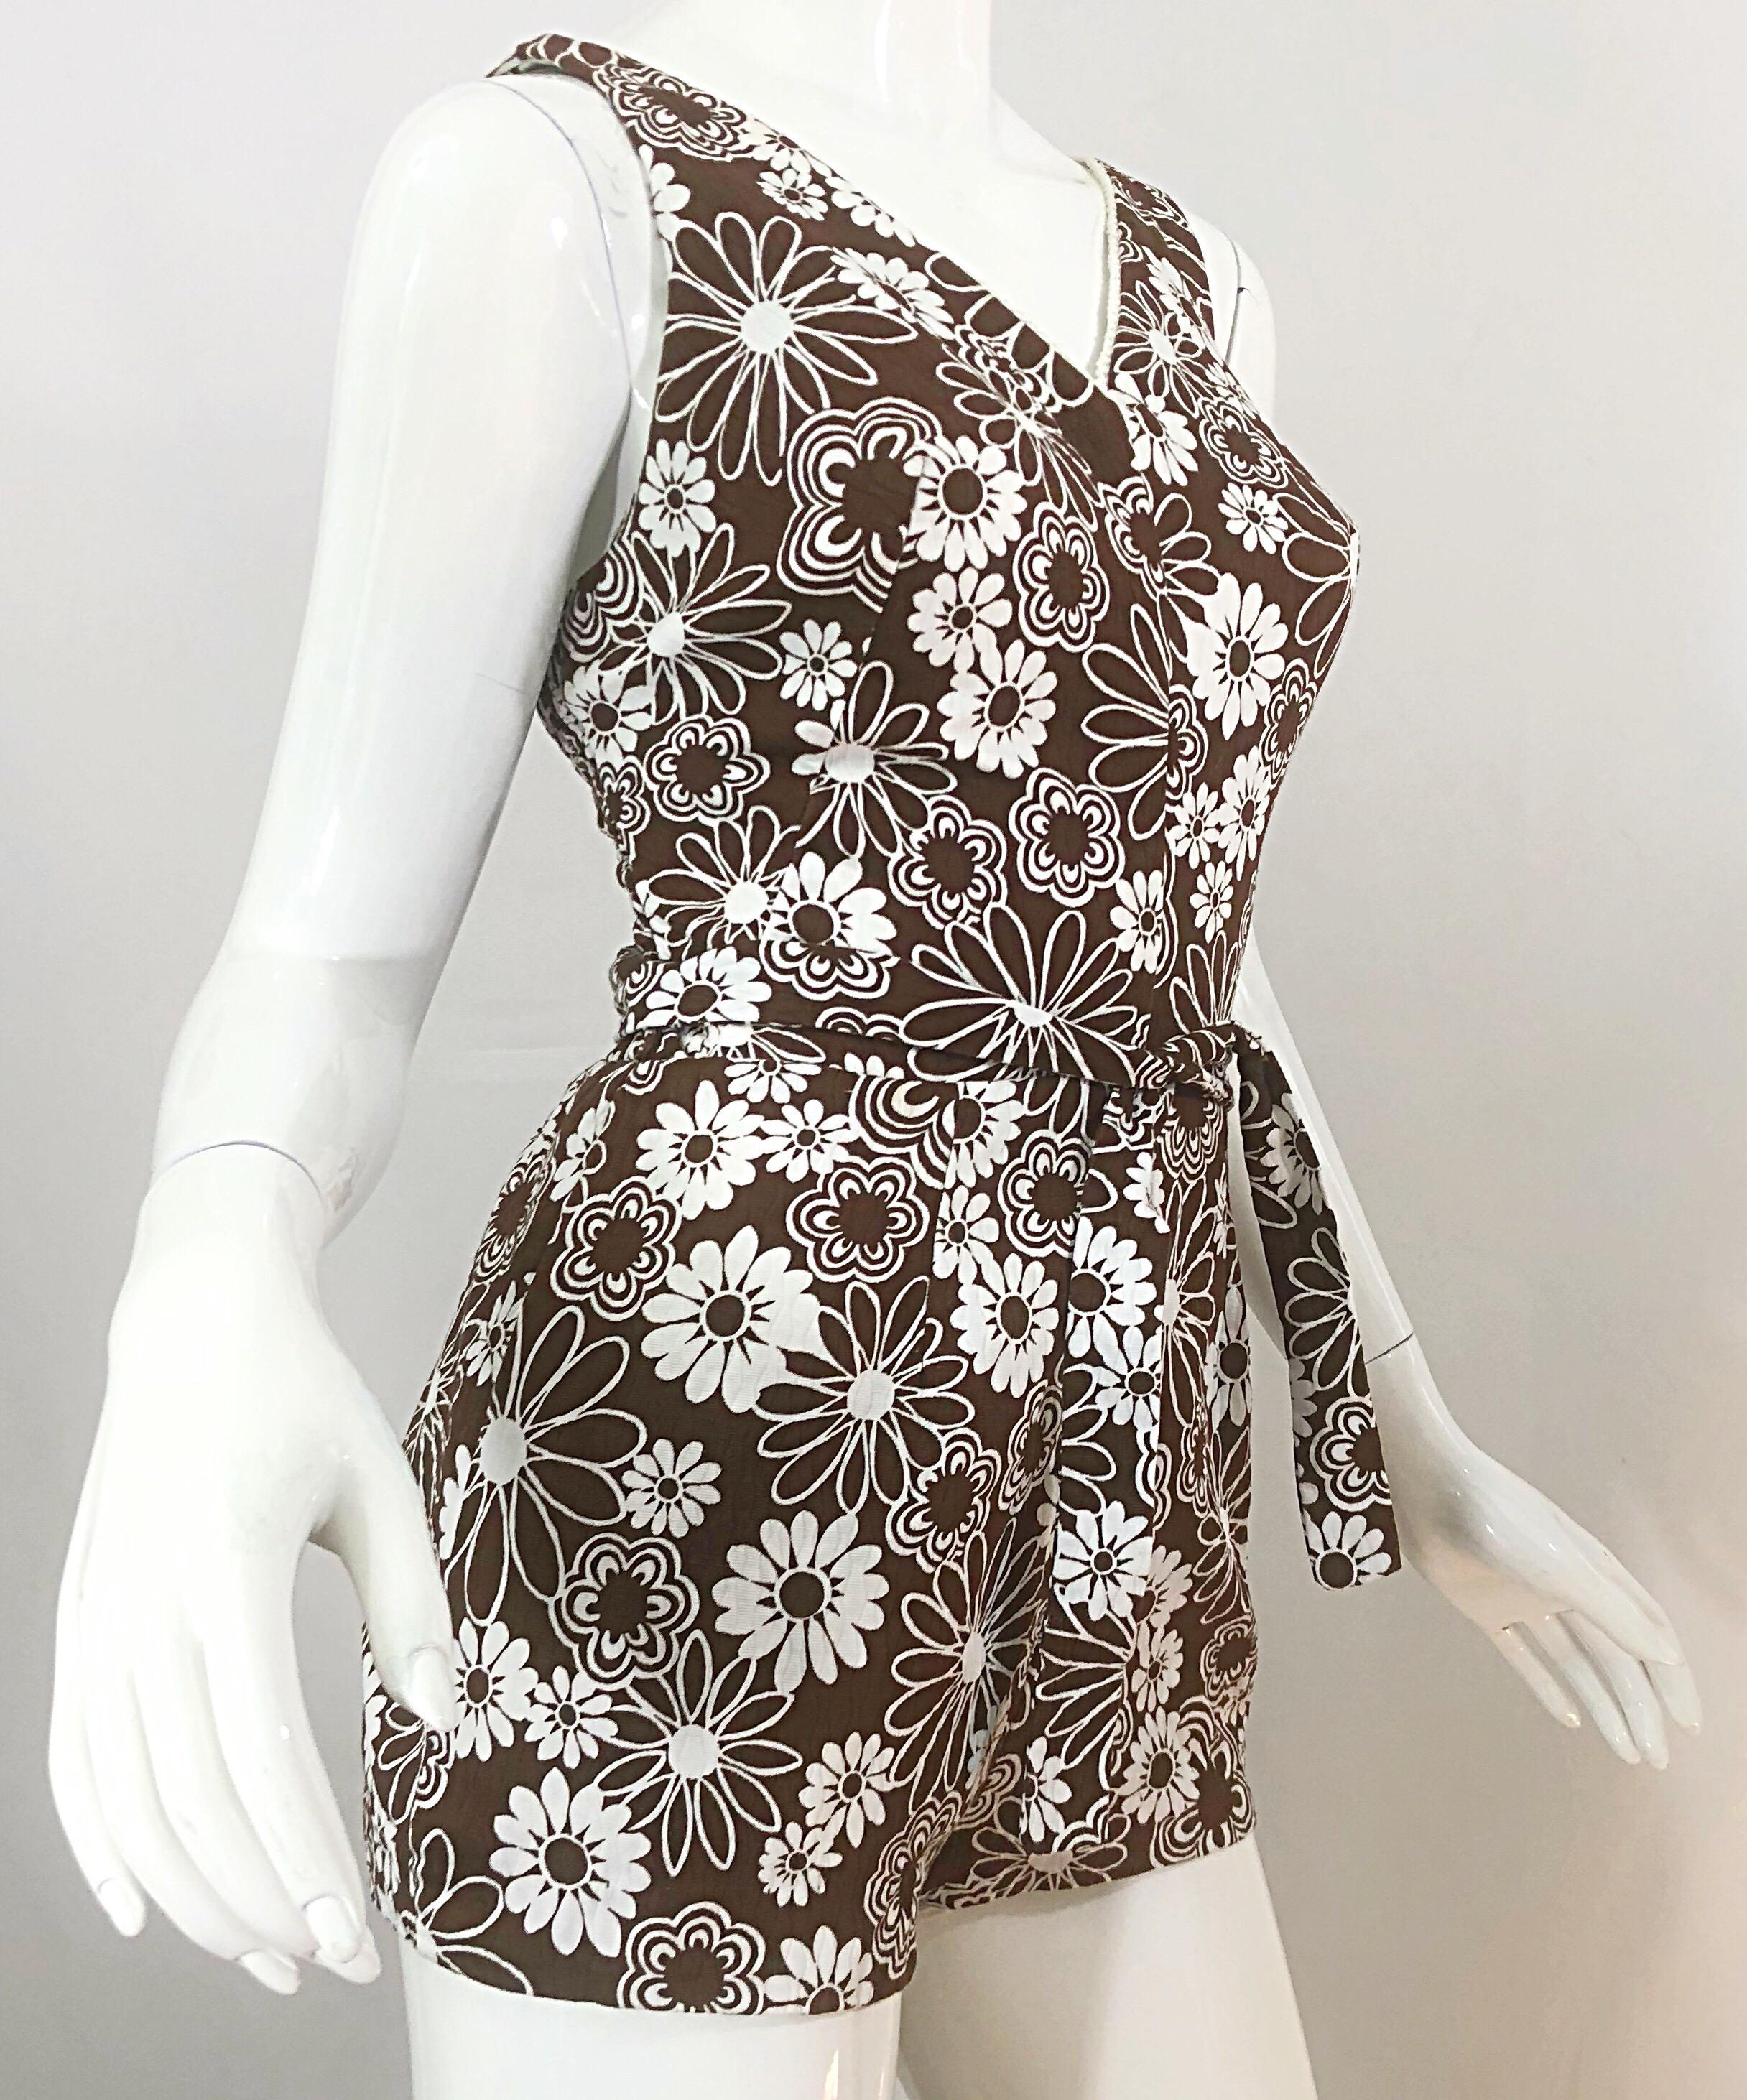 Chic 1960s Brown + White Belted One Piece Romper Swimsuit Vintage 60s Playsuit 3